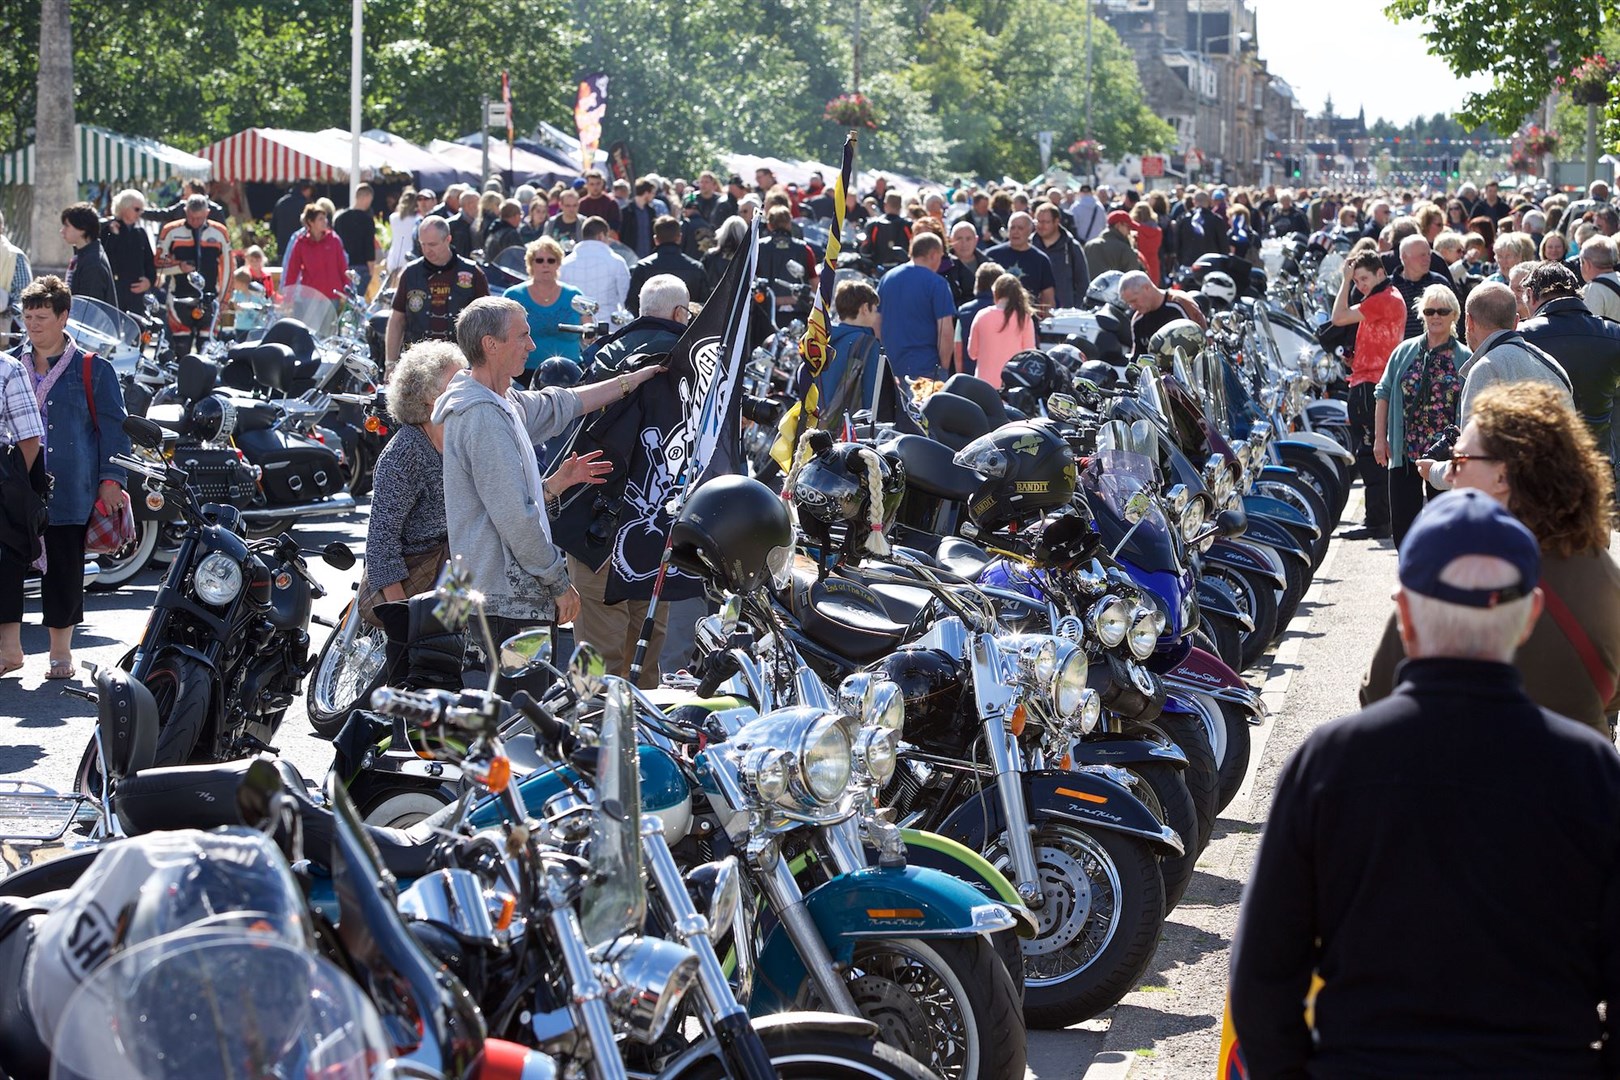 Thunder in the Glens is the biggest Harley Davidson gathering of its kind in the UK.